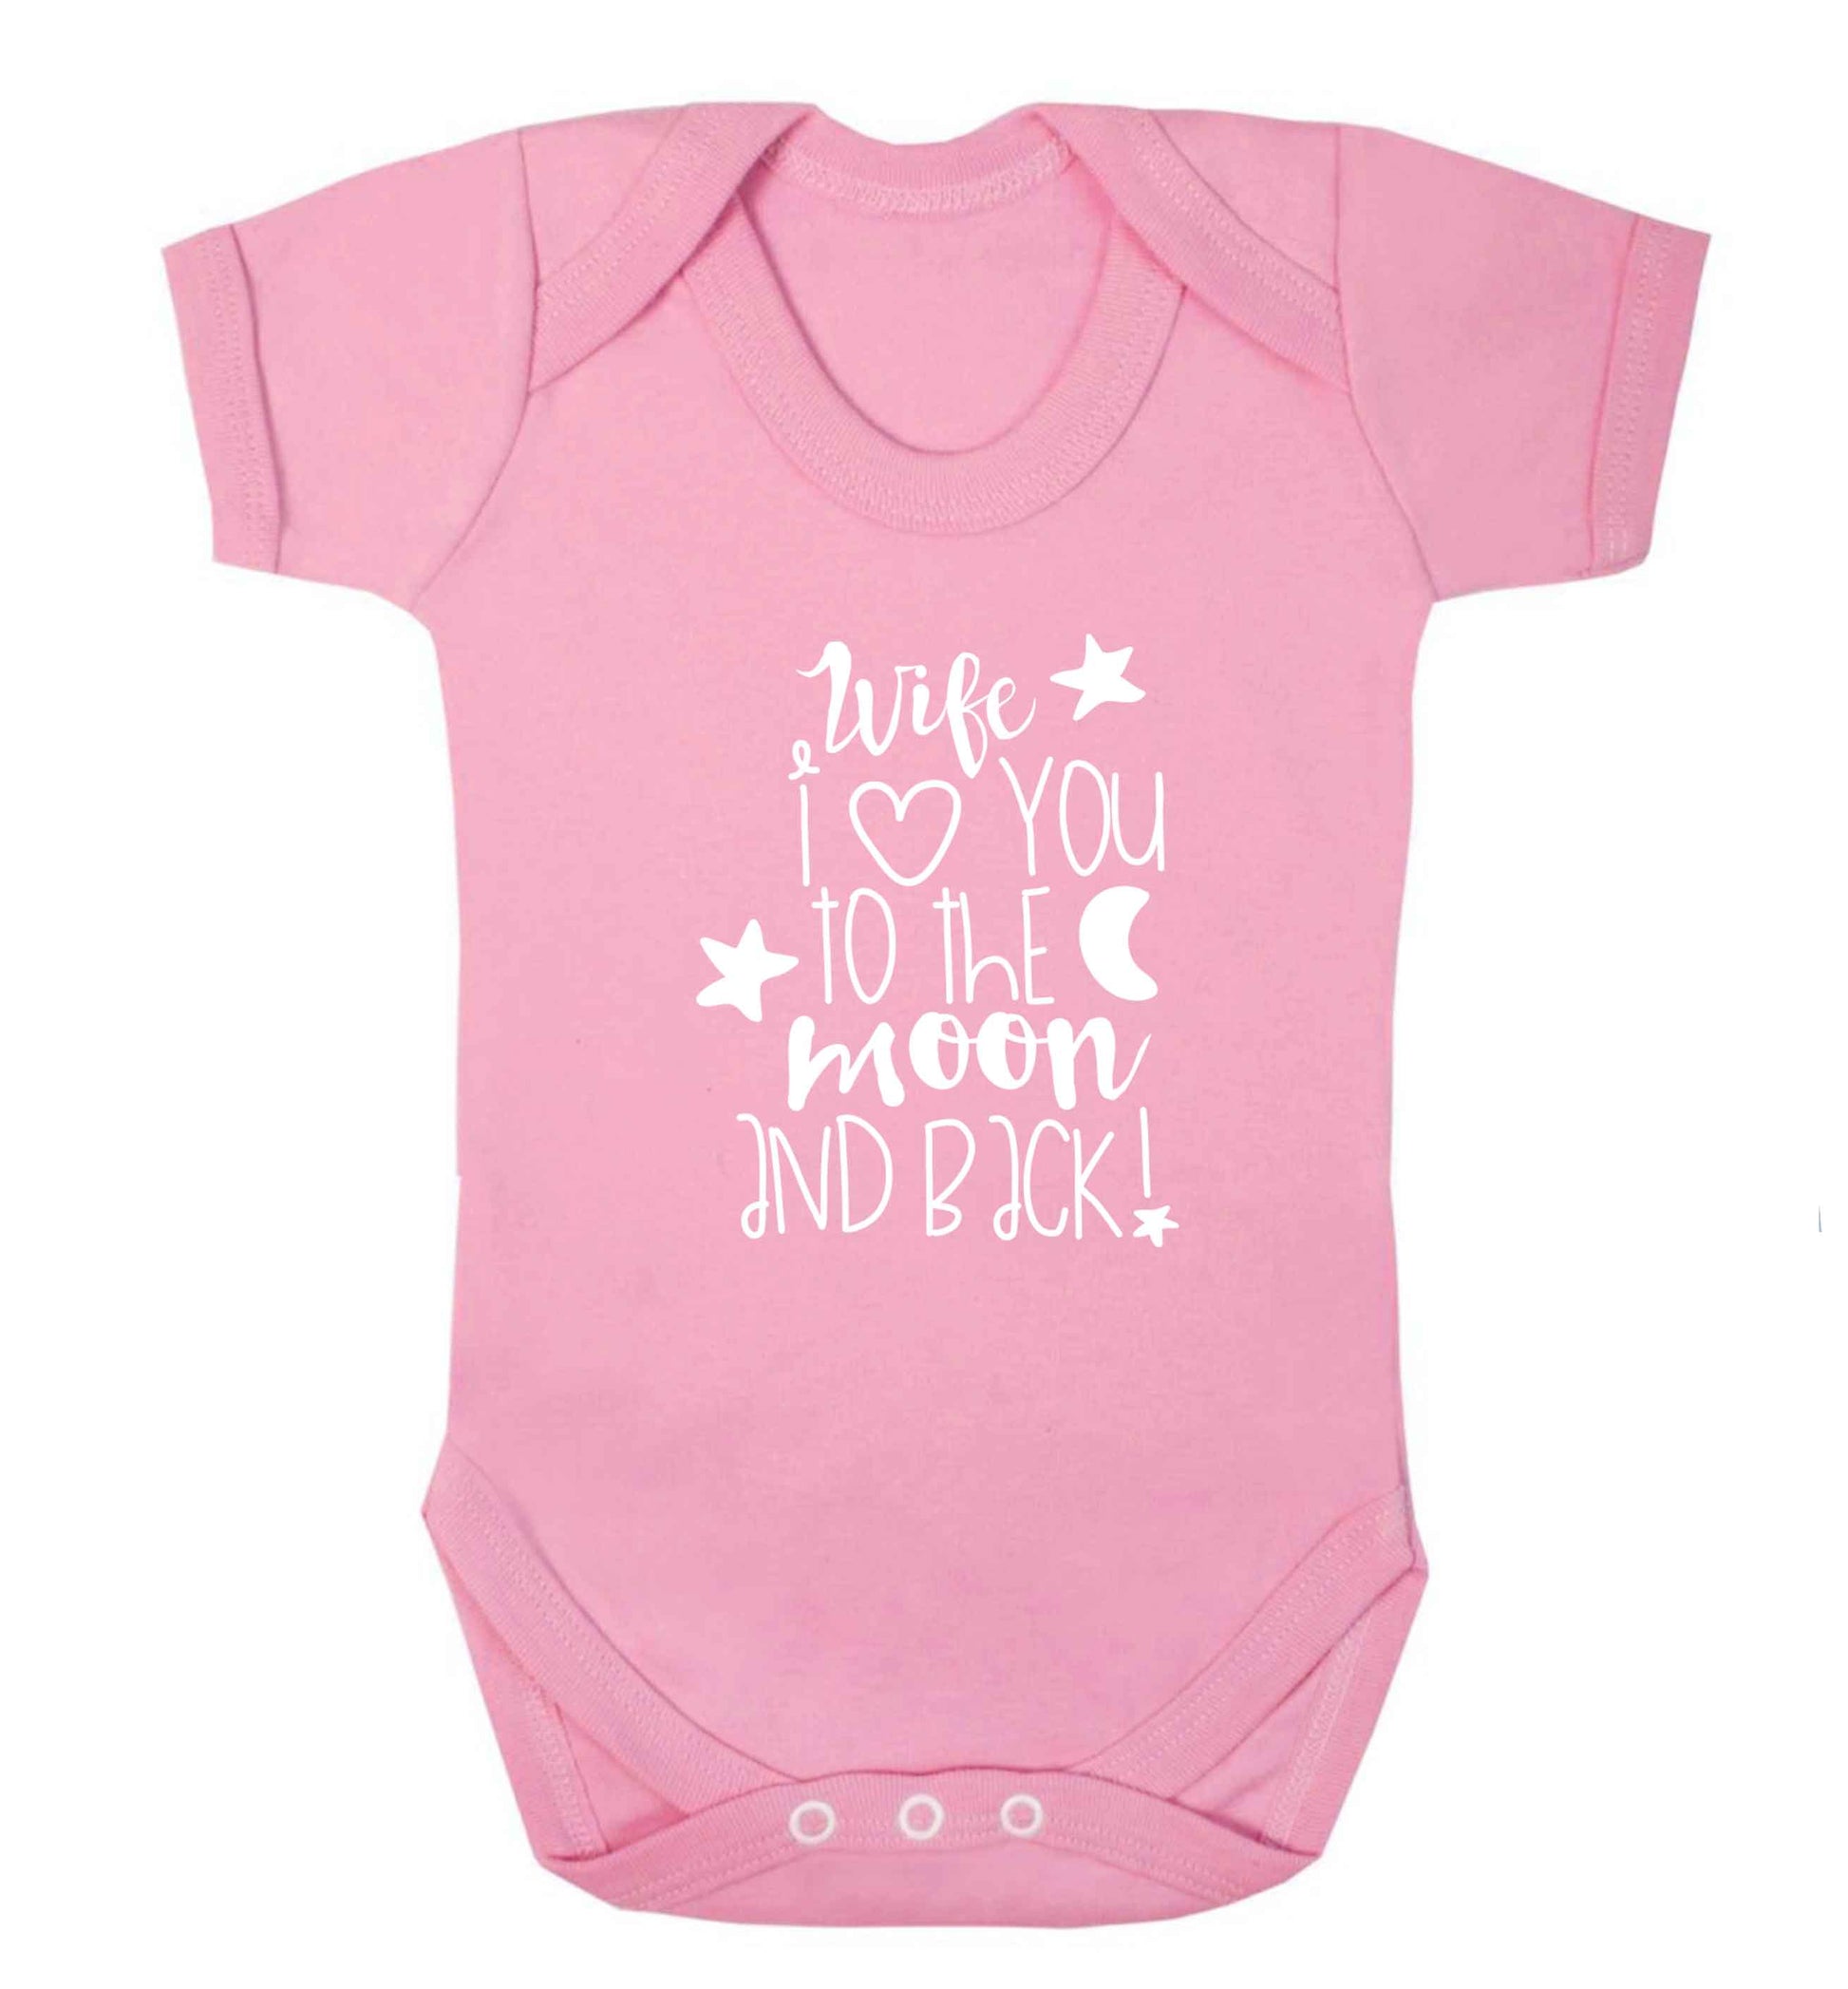 Wife I love you to the moon and back baby vest pale pink 18-24 months